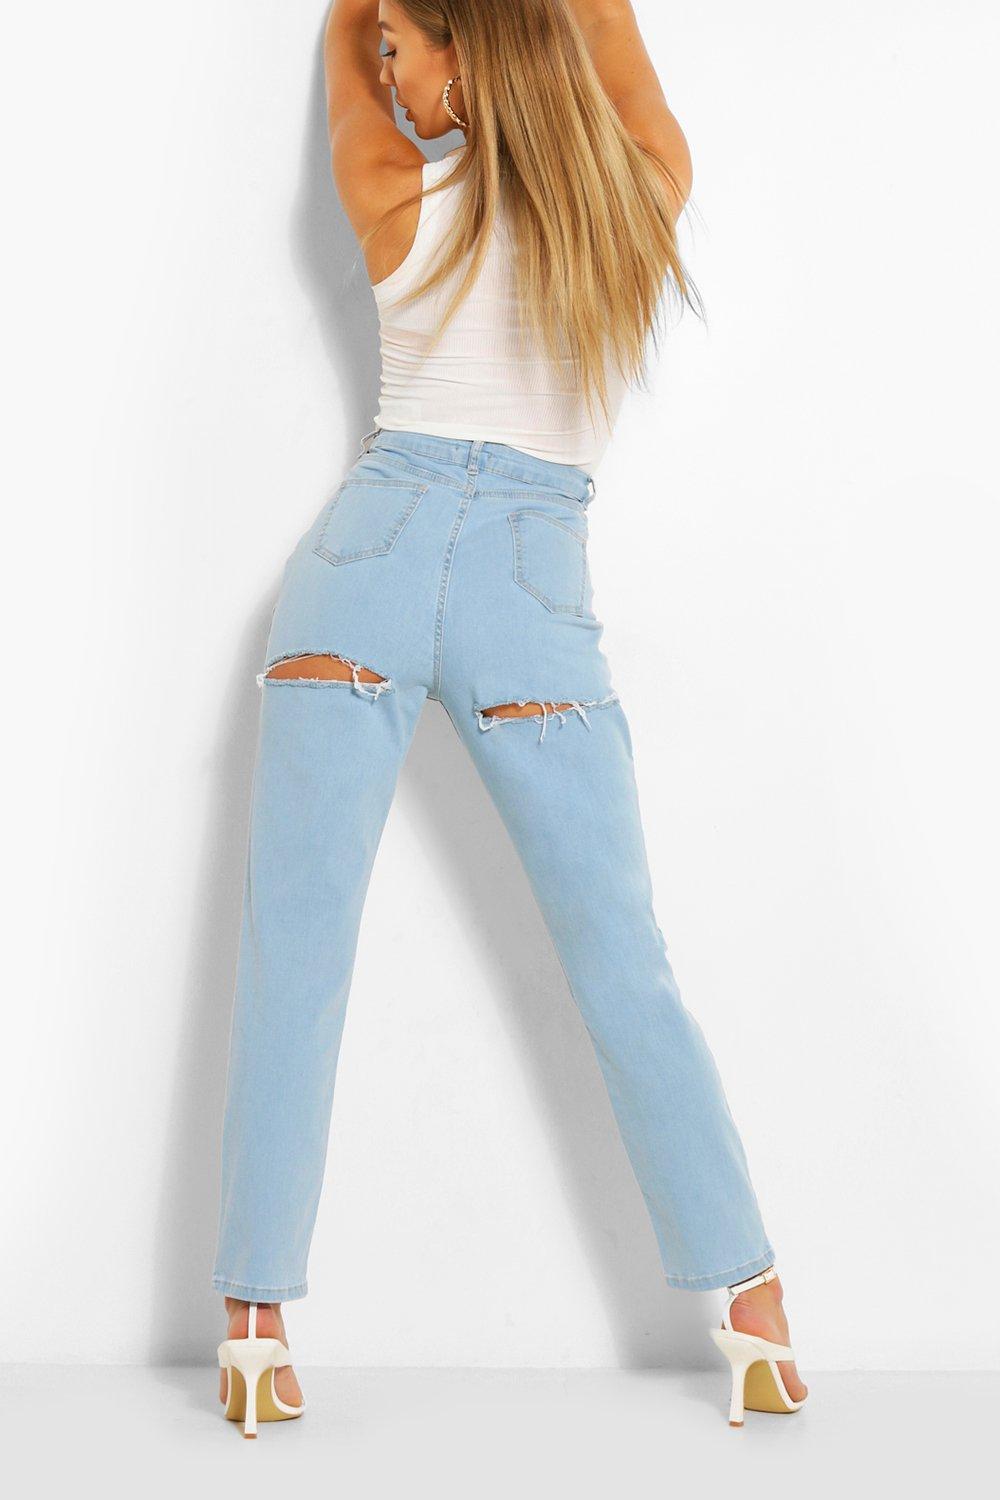 jeans ripped from back